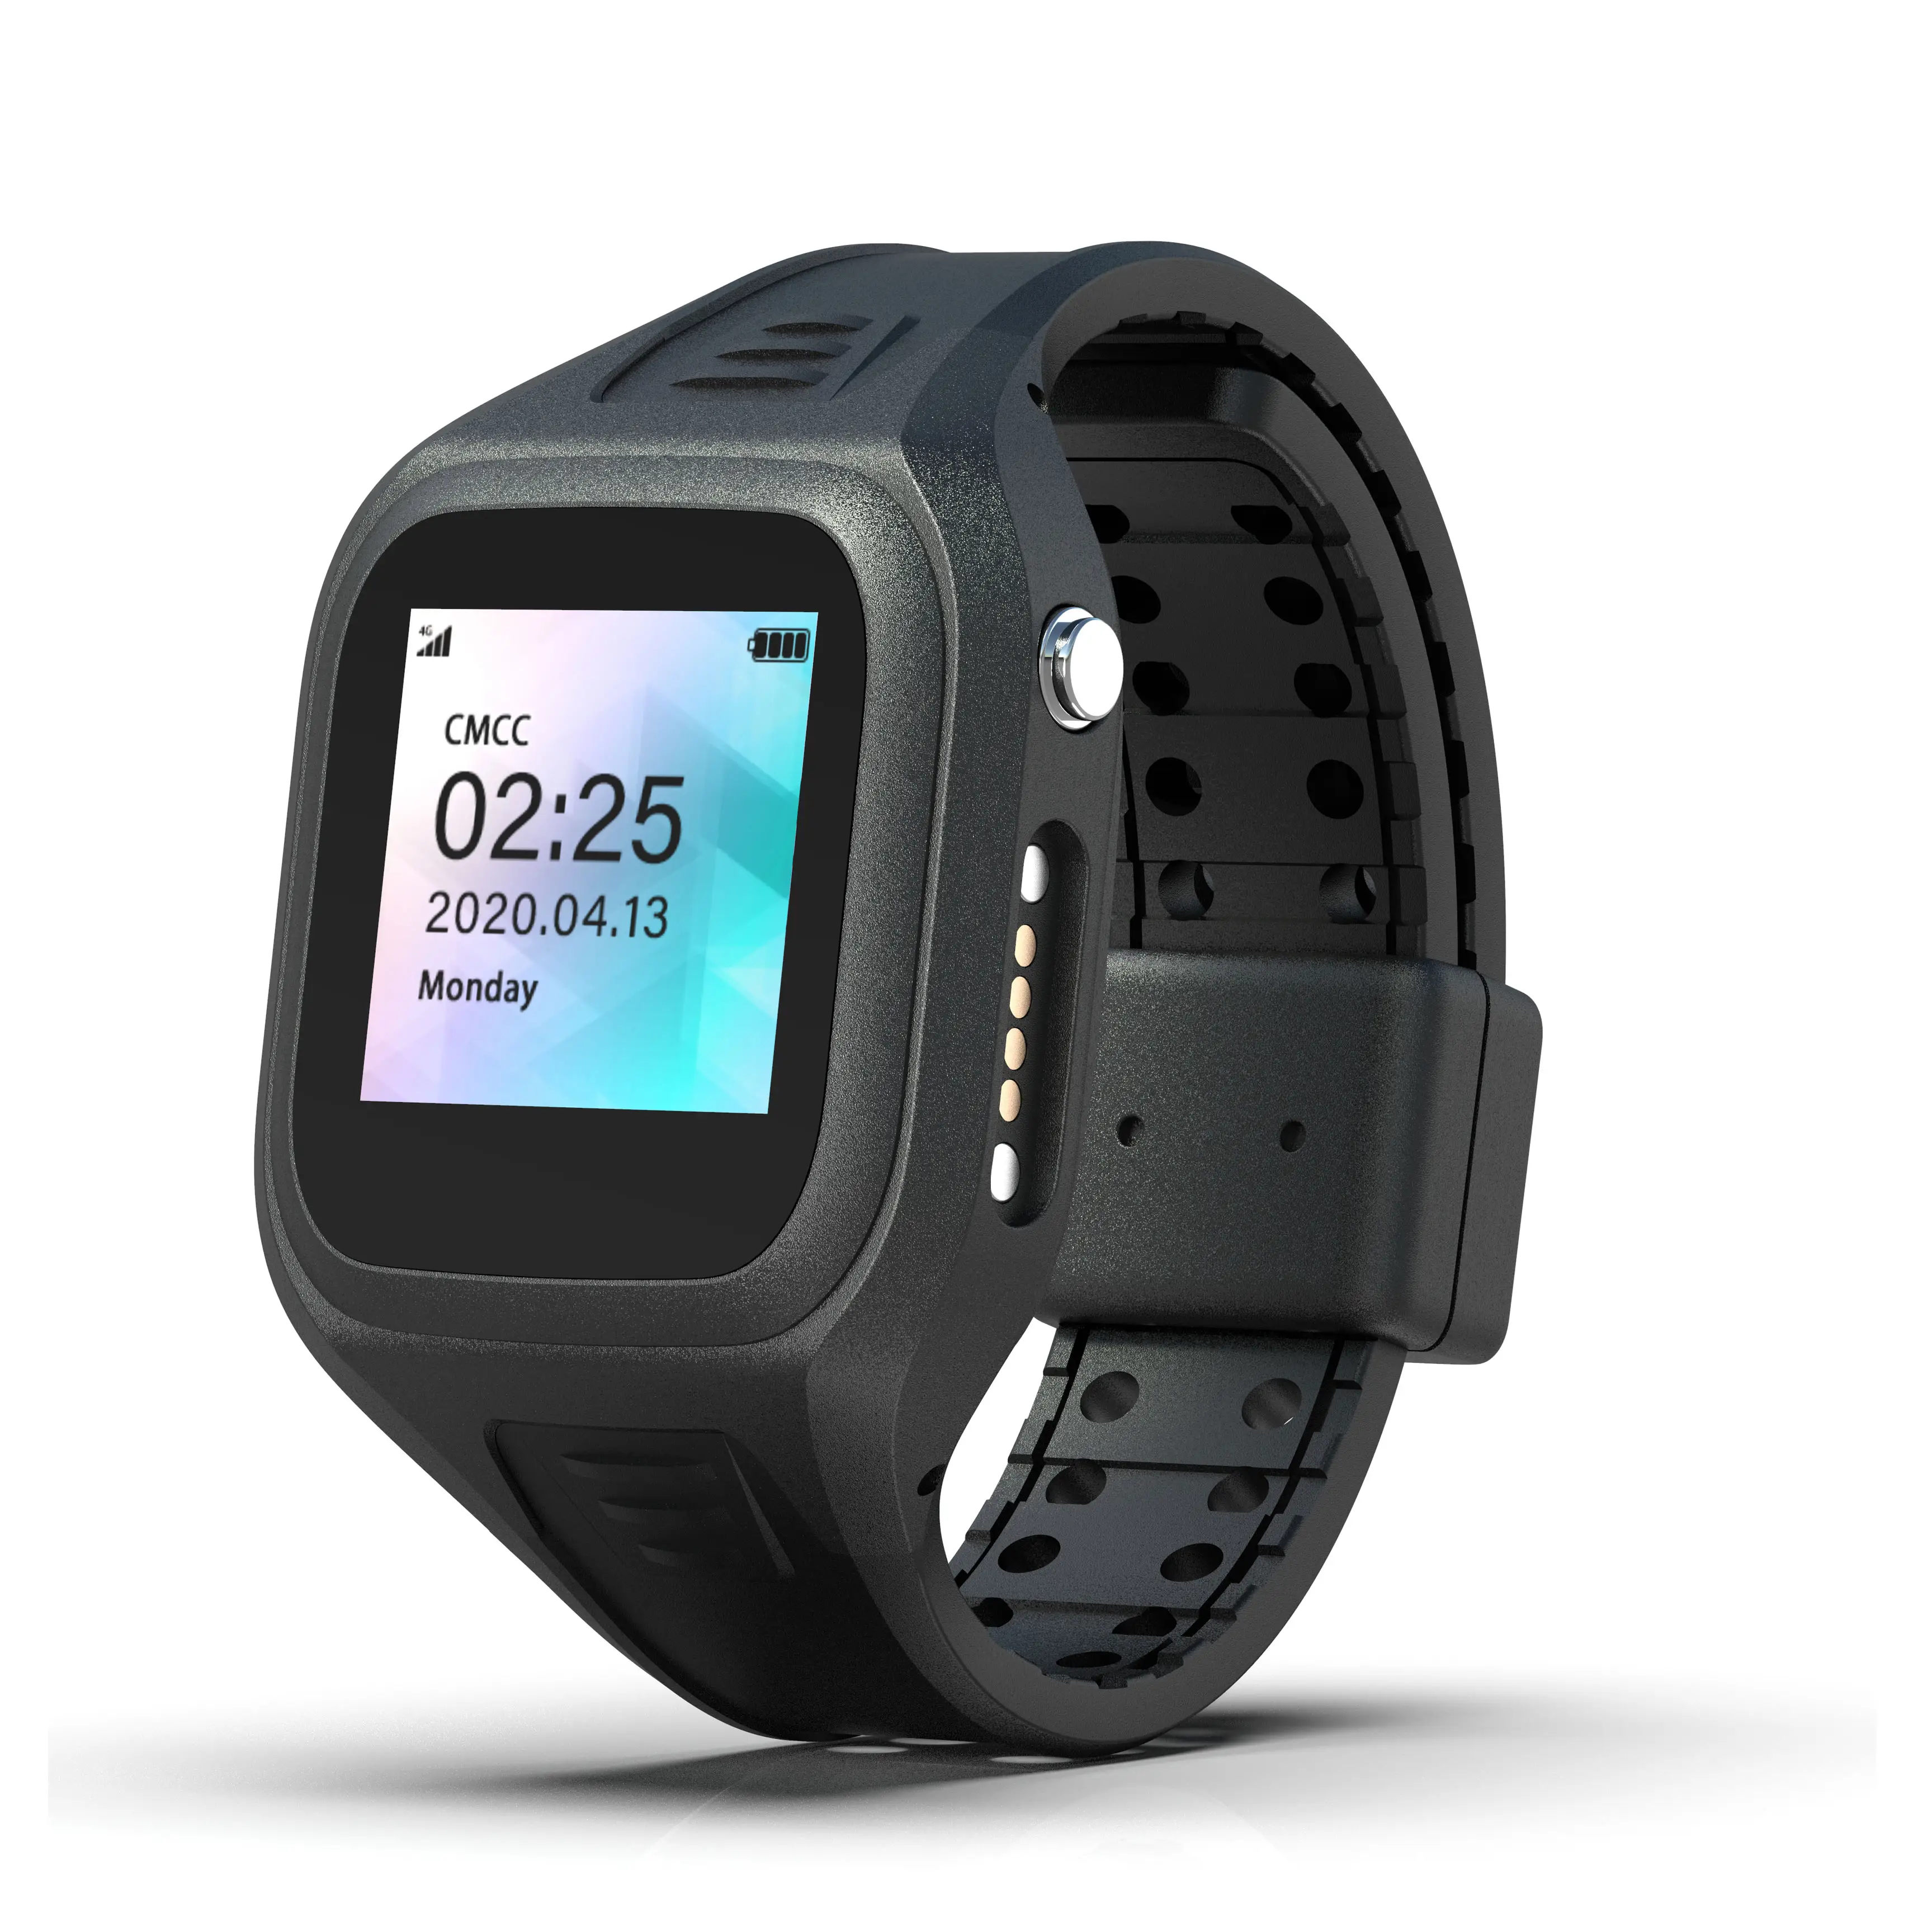 Tamper proof GPS watch with heart rate and temperature measurement